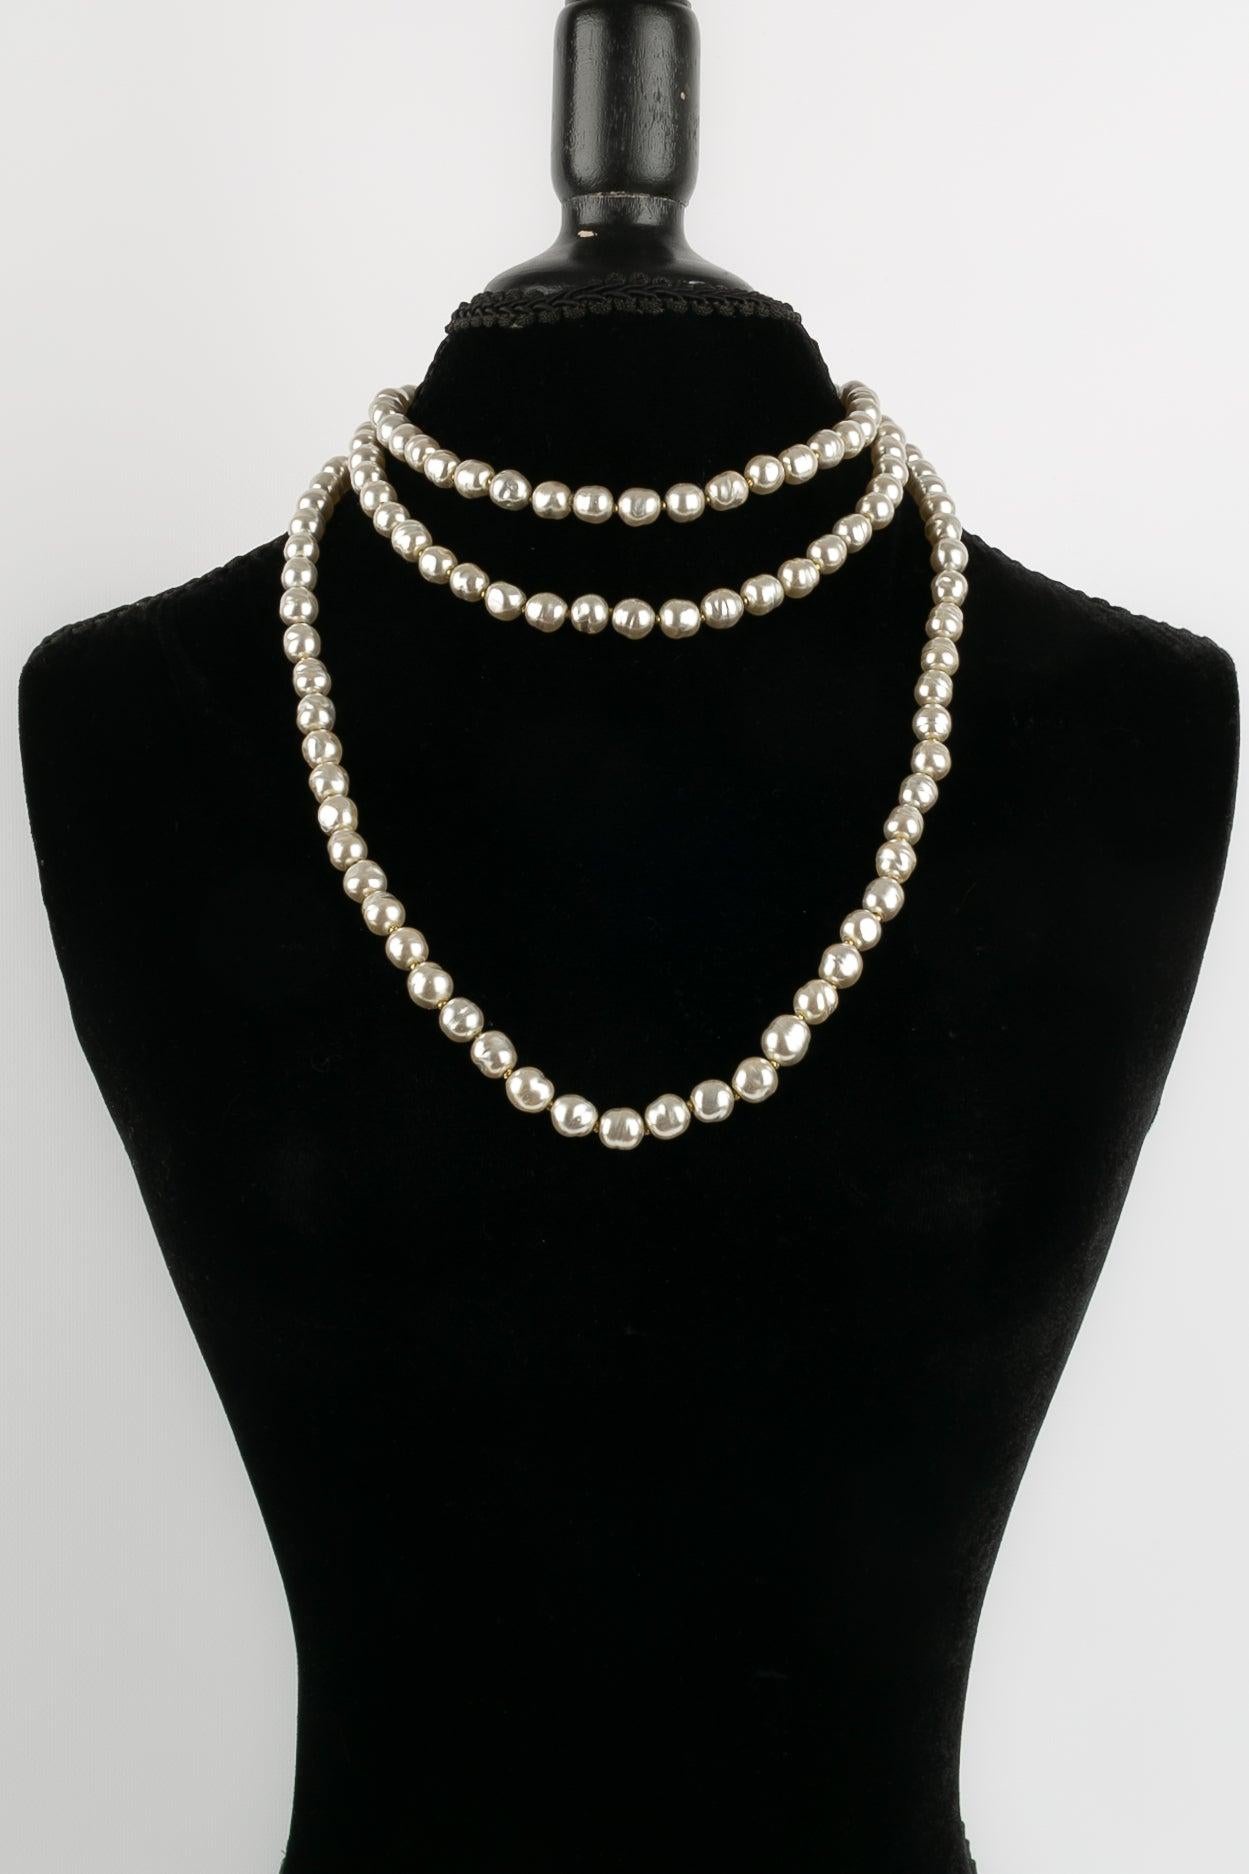 Chanel Pearl Necklace in Light Gray In Excellent Condition For Sale In SAINT-OUEN-SUR-SEINE, FR